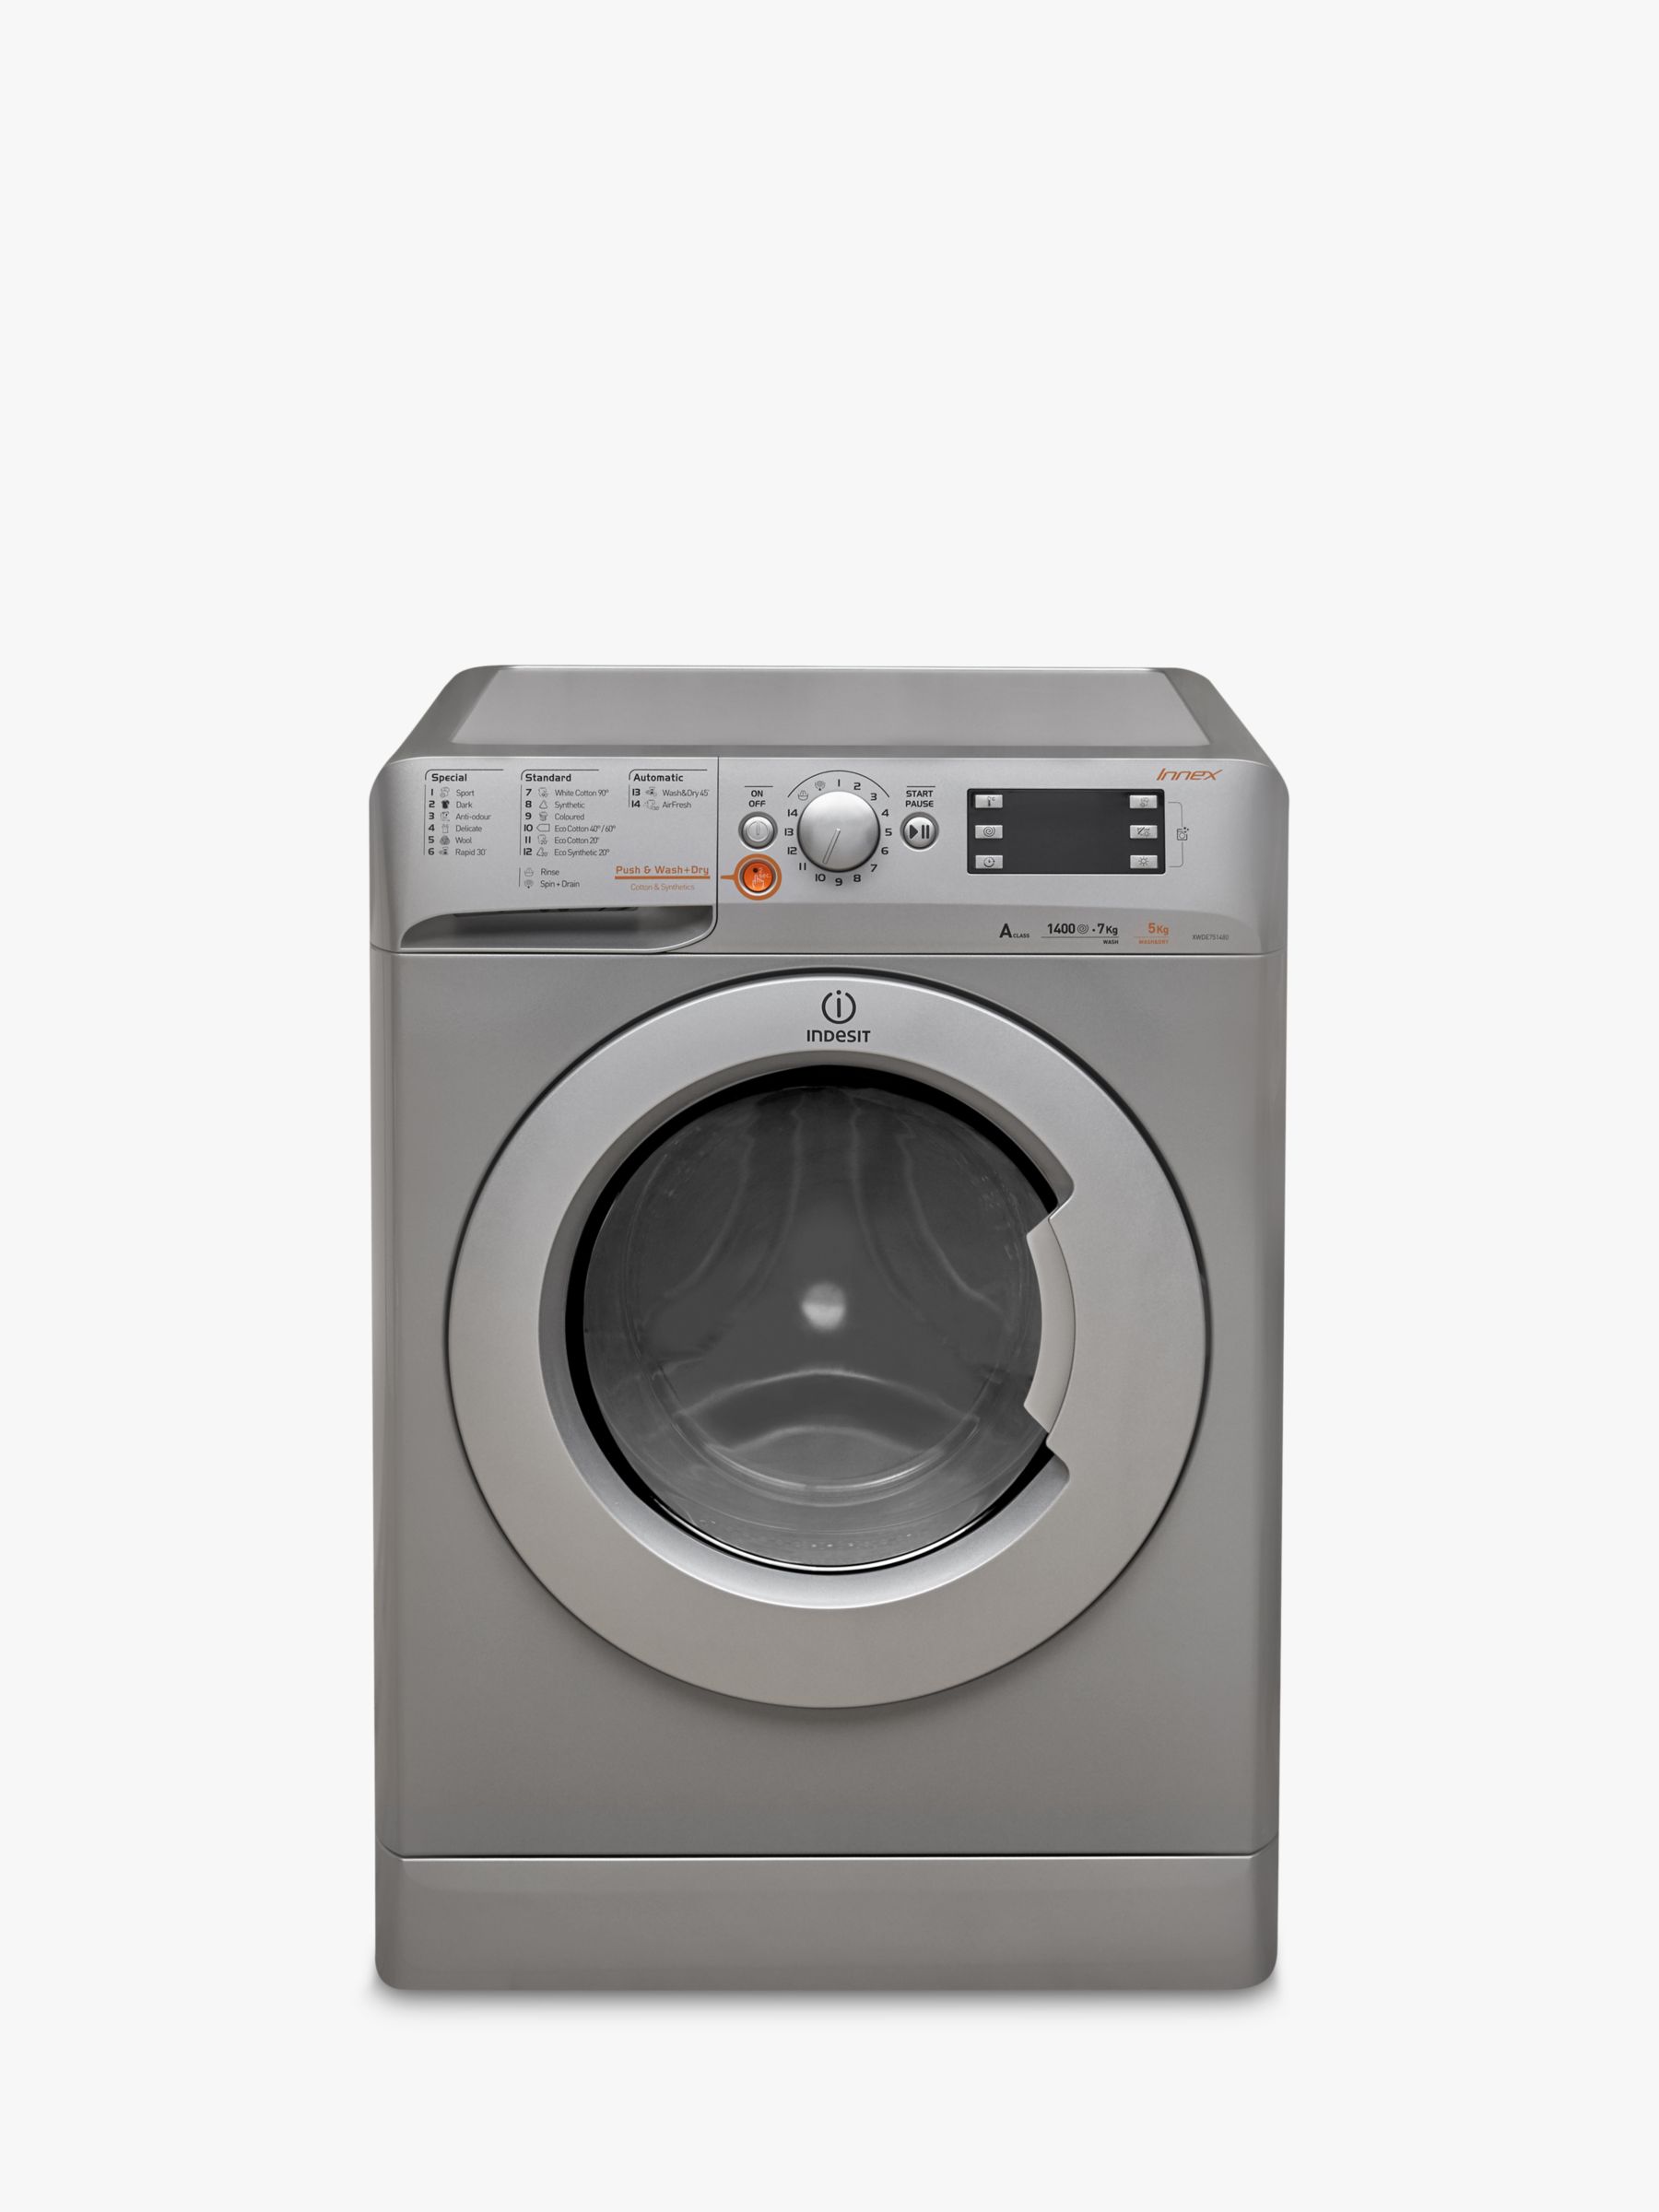 Indesit iwdc 6125 s washer dryer user manual instructions